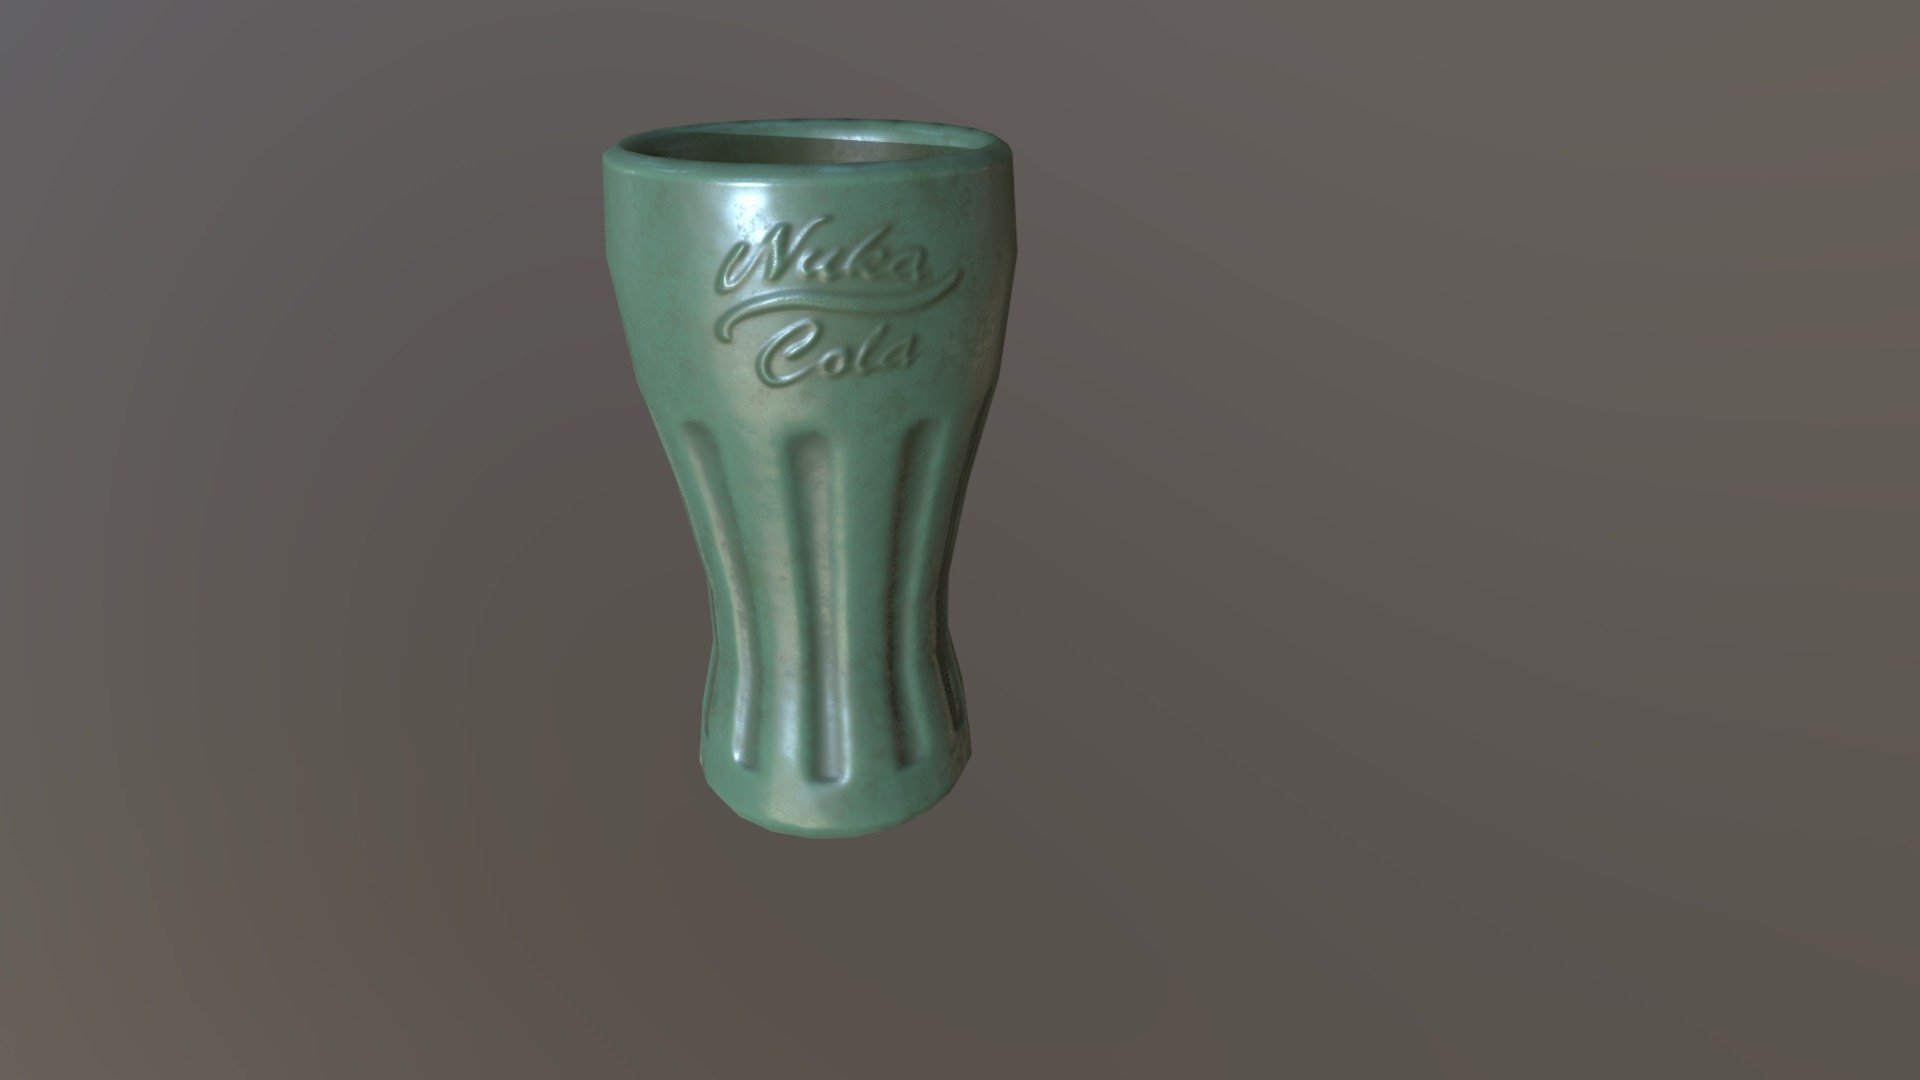 one of many useless Junk items seen in Fallout 3 and Fallout New Vegas.
For use in Fallout 4 3d model